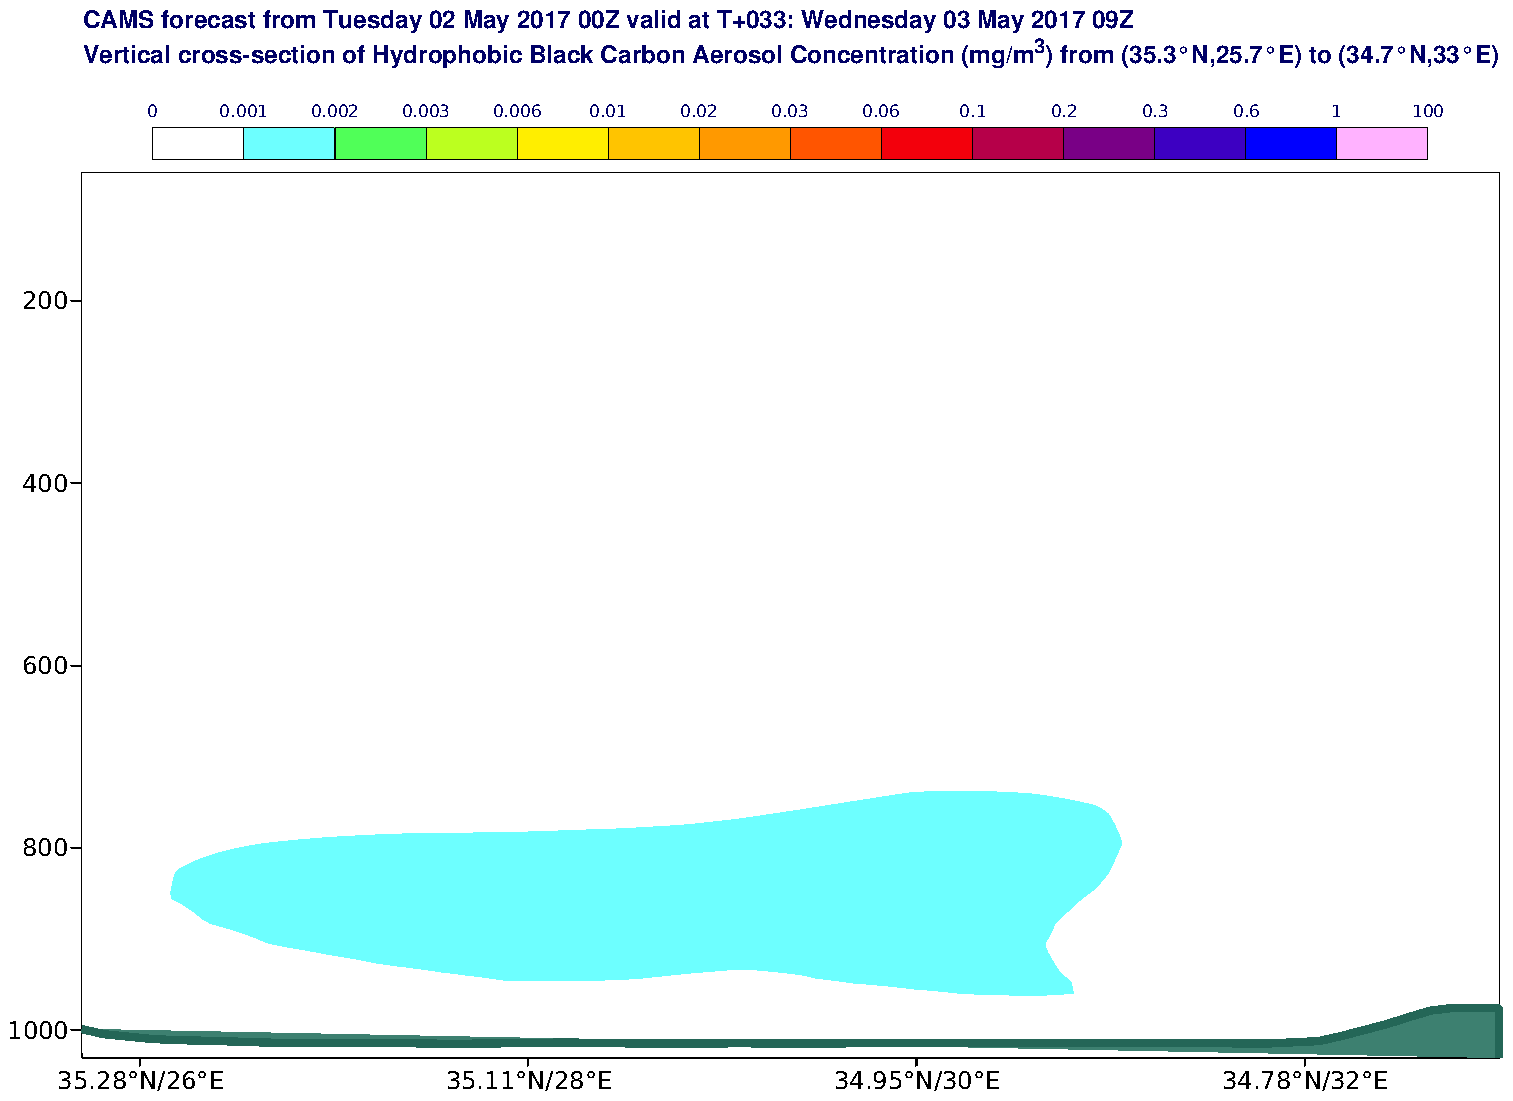 Vertical cross-section of Hydrophobic Black Carbon Aerosol Concentration (mg/m3) valid at T33 - 2017-05-03 09:00